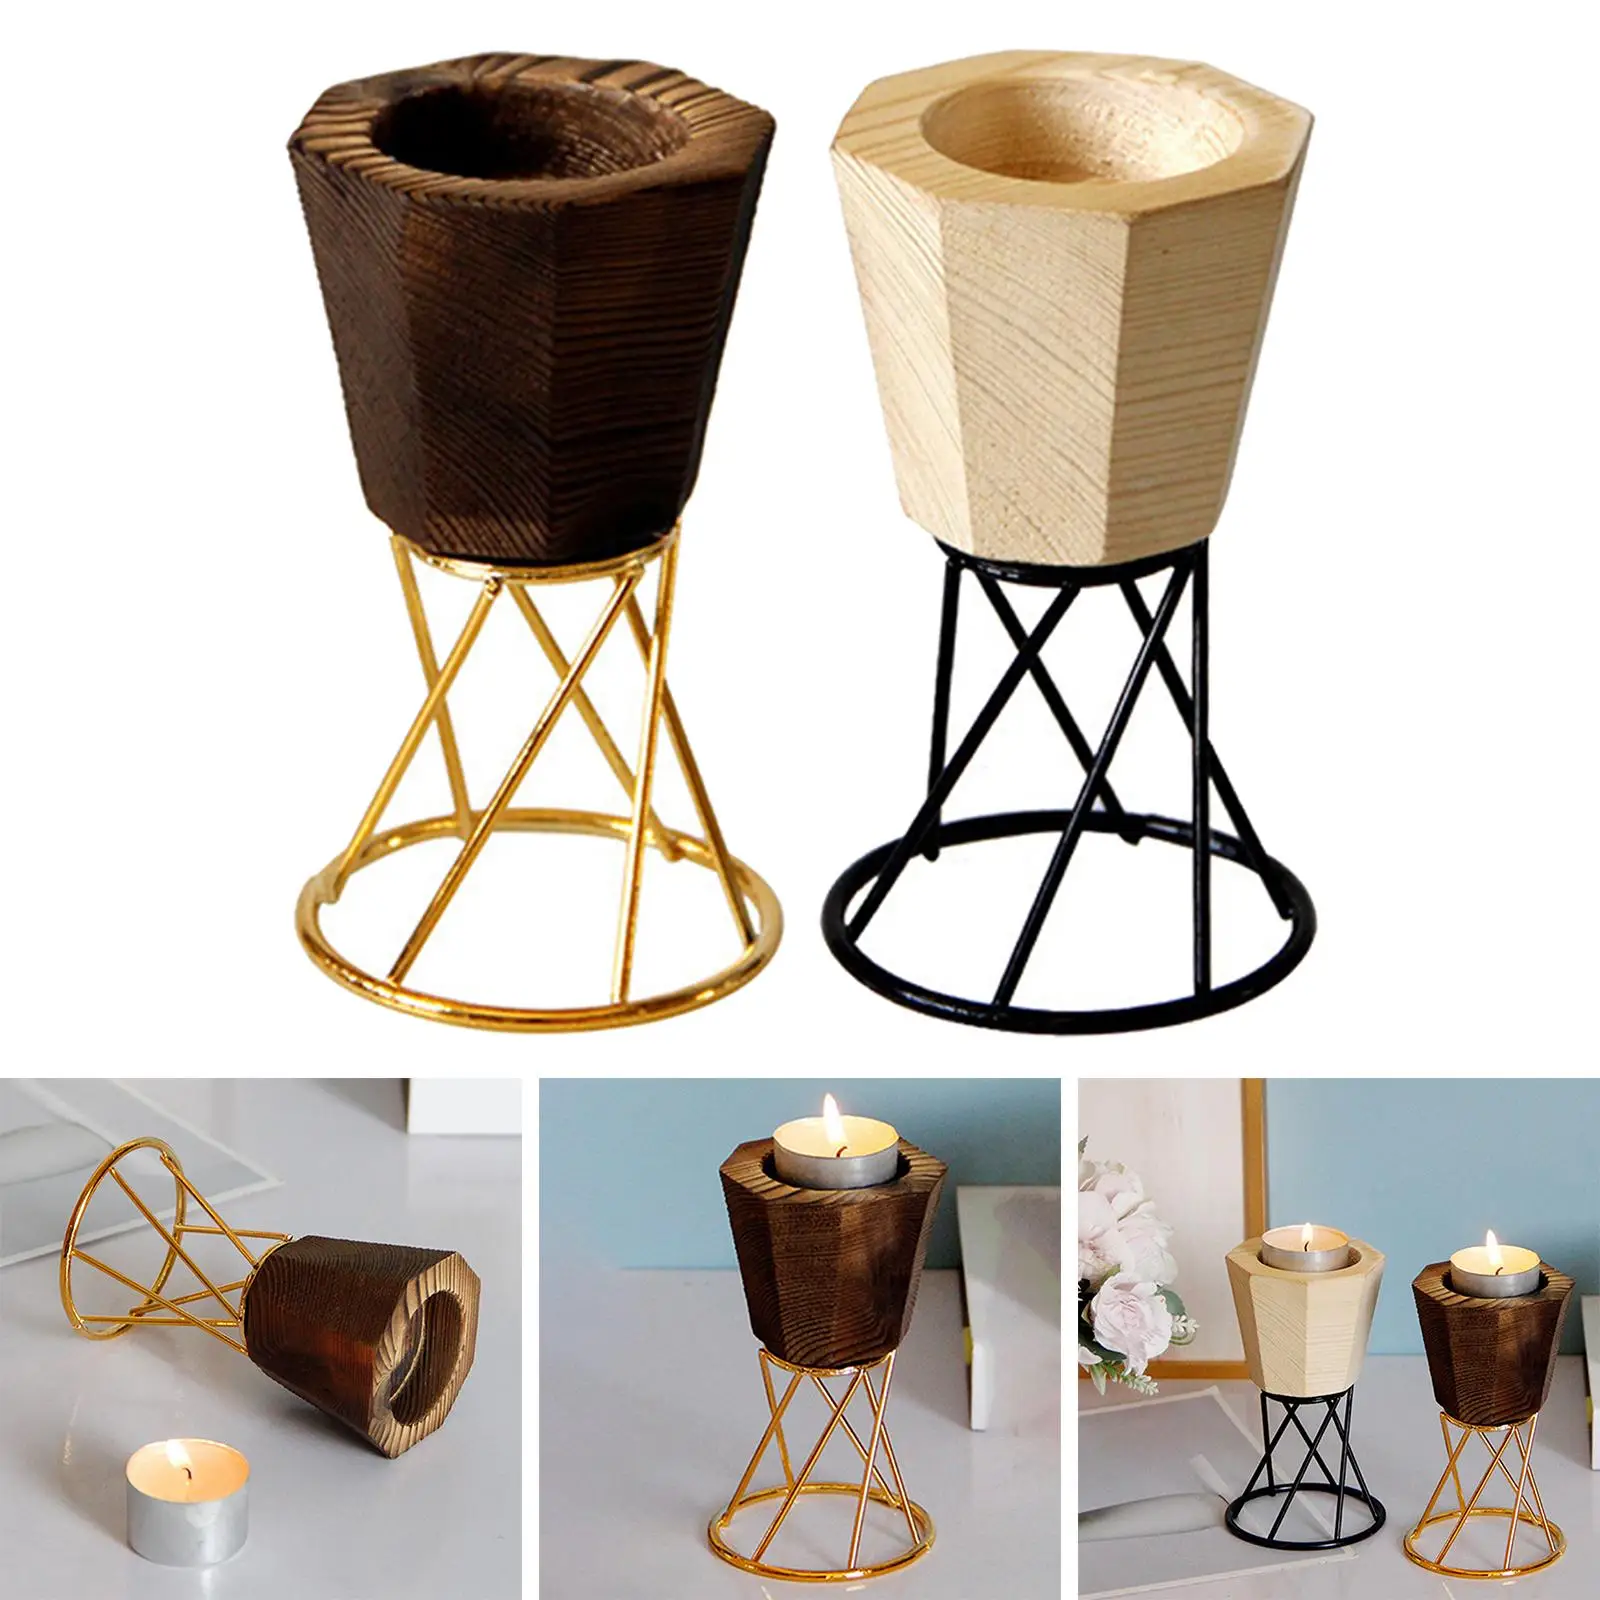 Wooden Candle Holders Candlestick Tealight Dinner Table Party Christmas Home